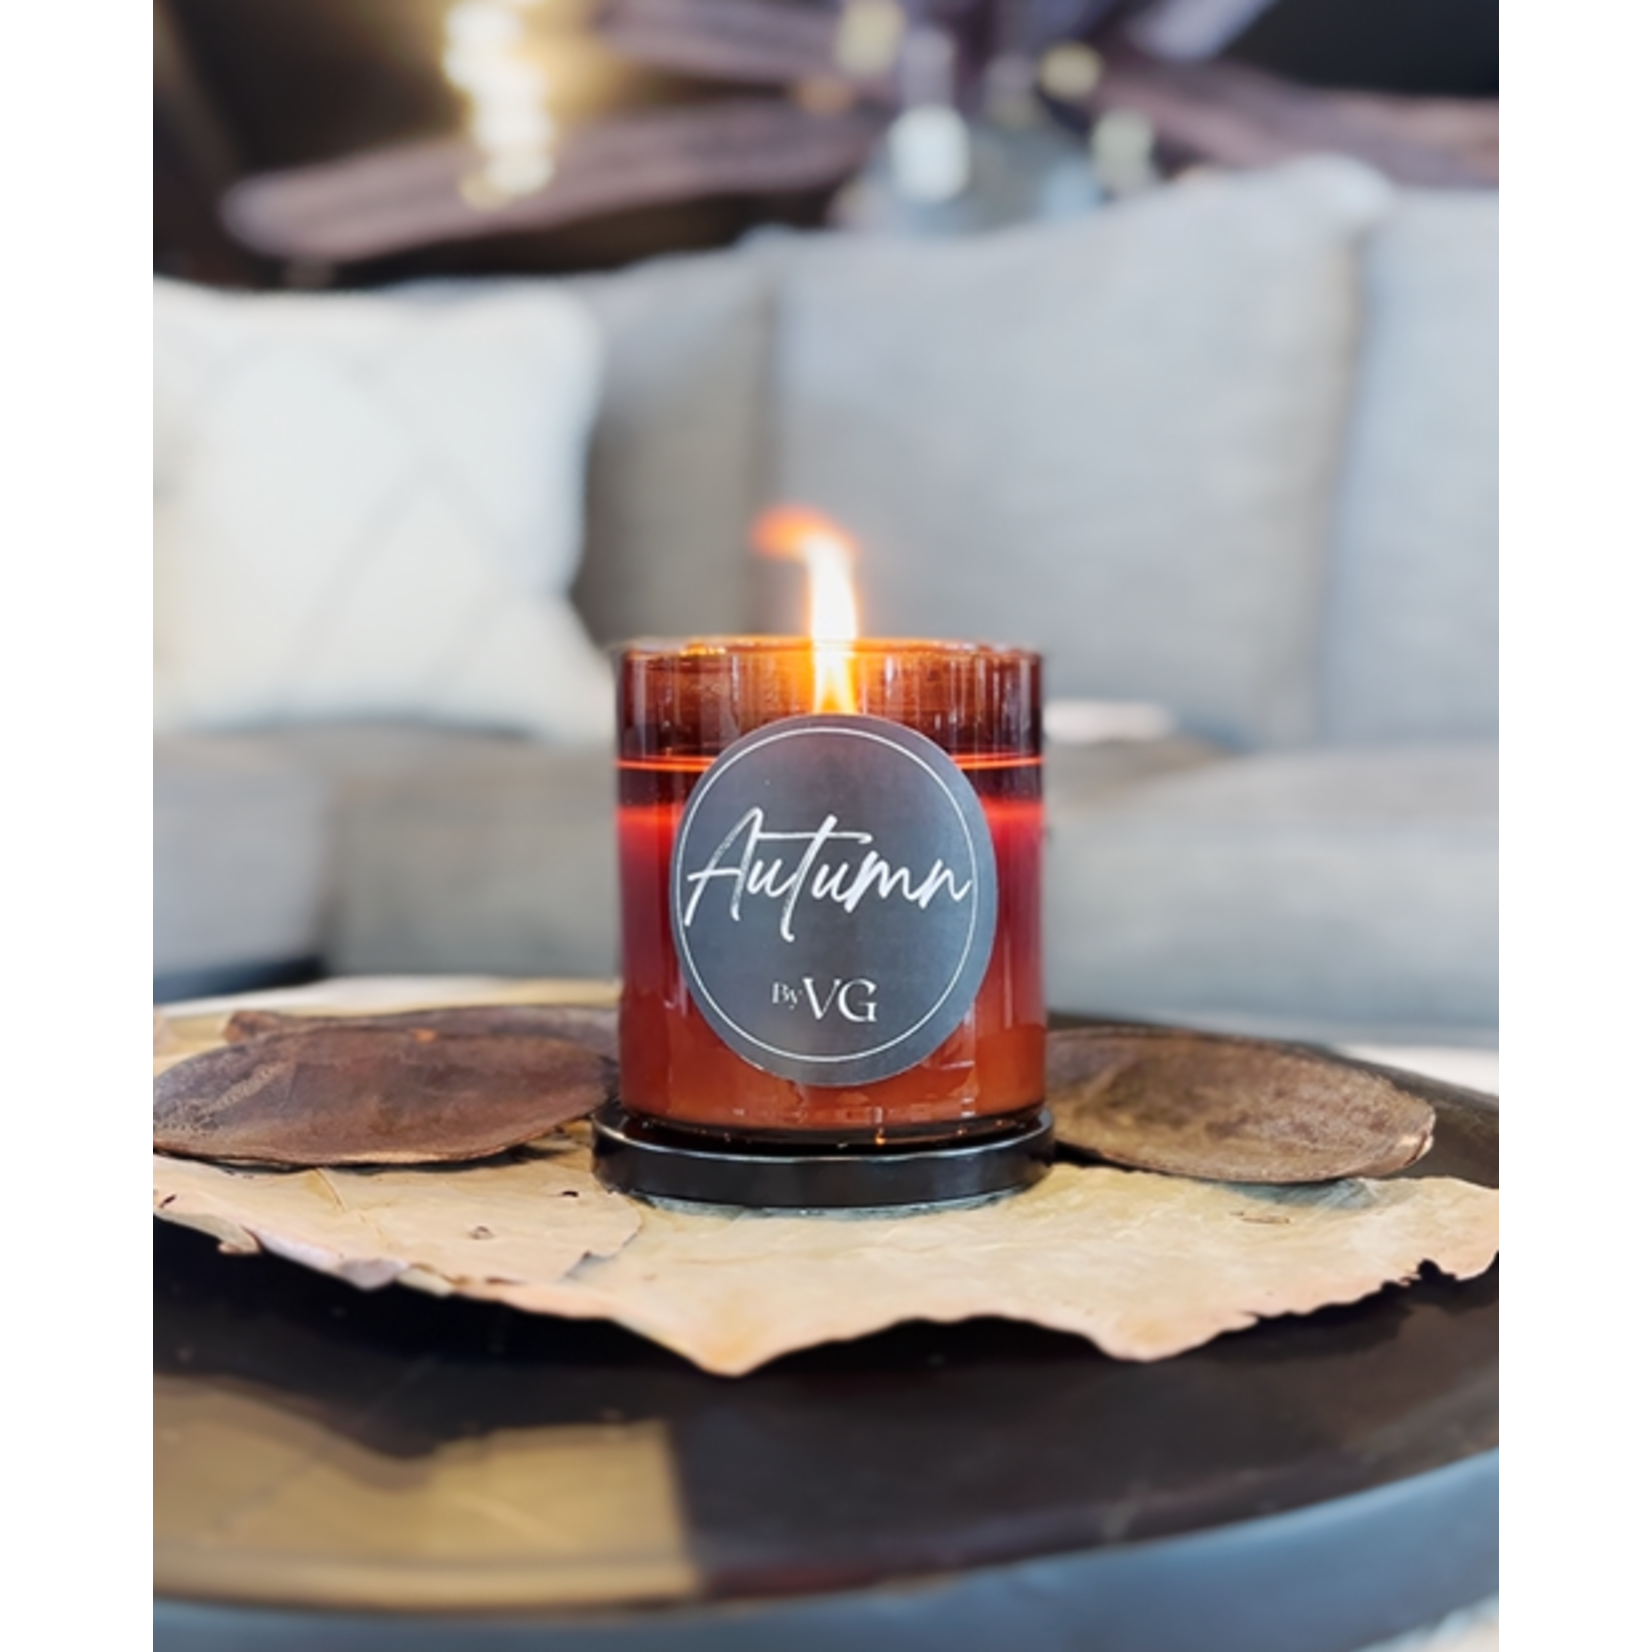 CANDLE CREST "AUTUMN" By VG Signature Candle